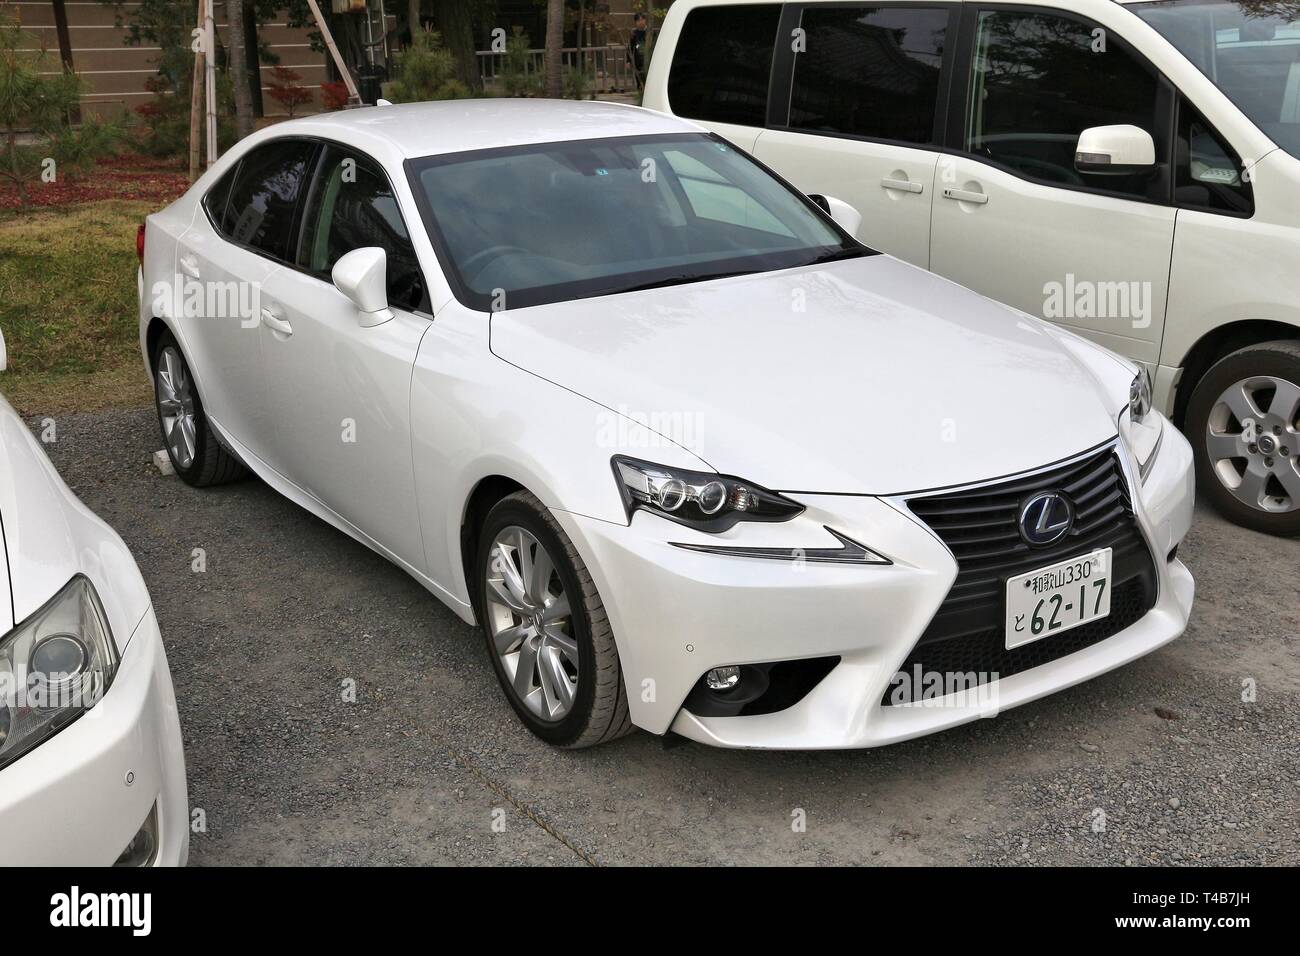 KYOTO, JAPAN - NOVEMBER 26, 2016: Lexus GS mid-size luxury car parked in Kyoto, Japan. There are approximately 68.9 million cars registered in Japan. Stock Photo